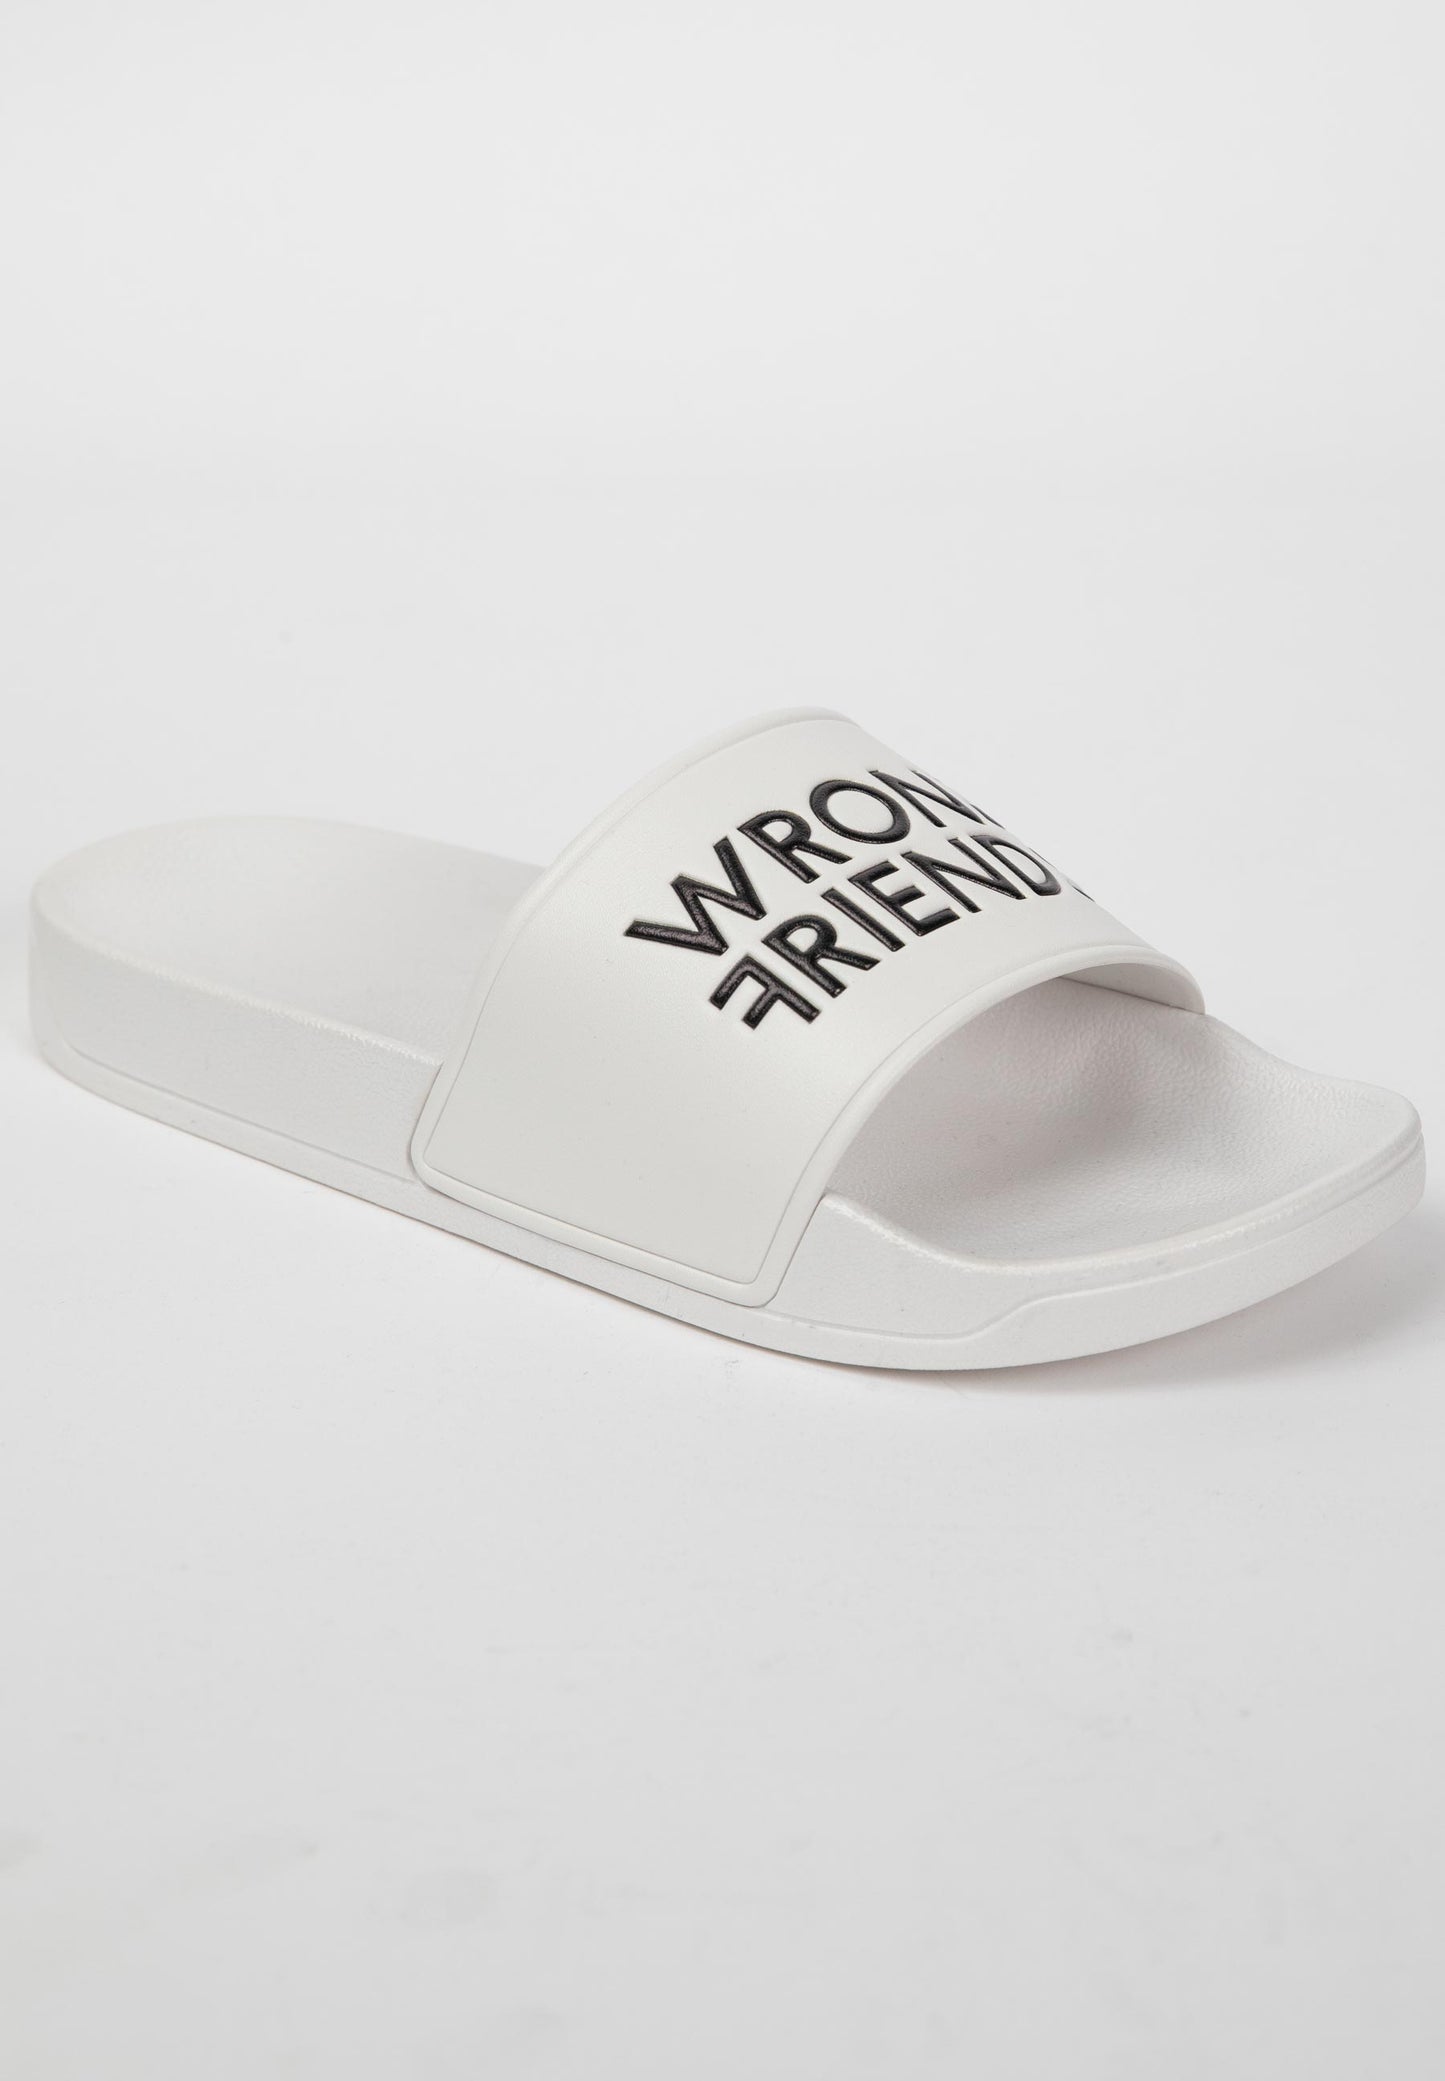 WRONG FRIENDS SLIDES WHITE